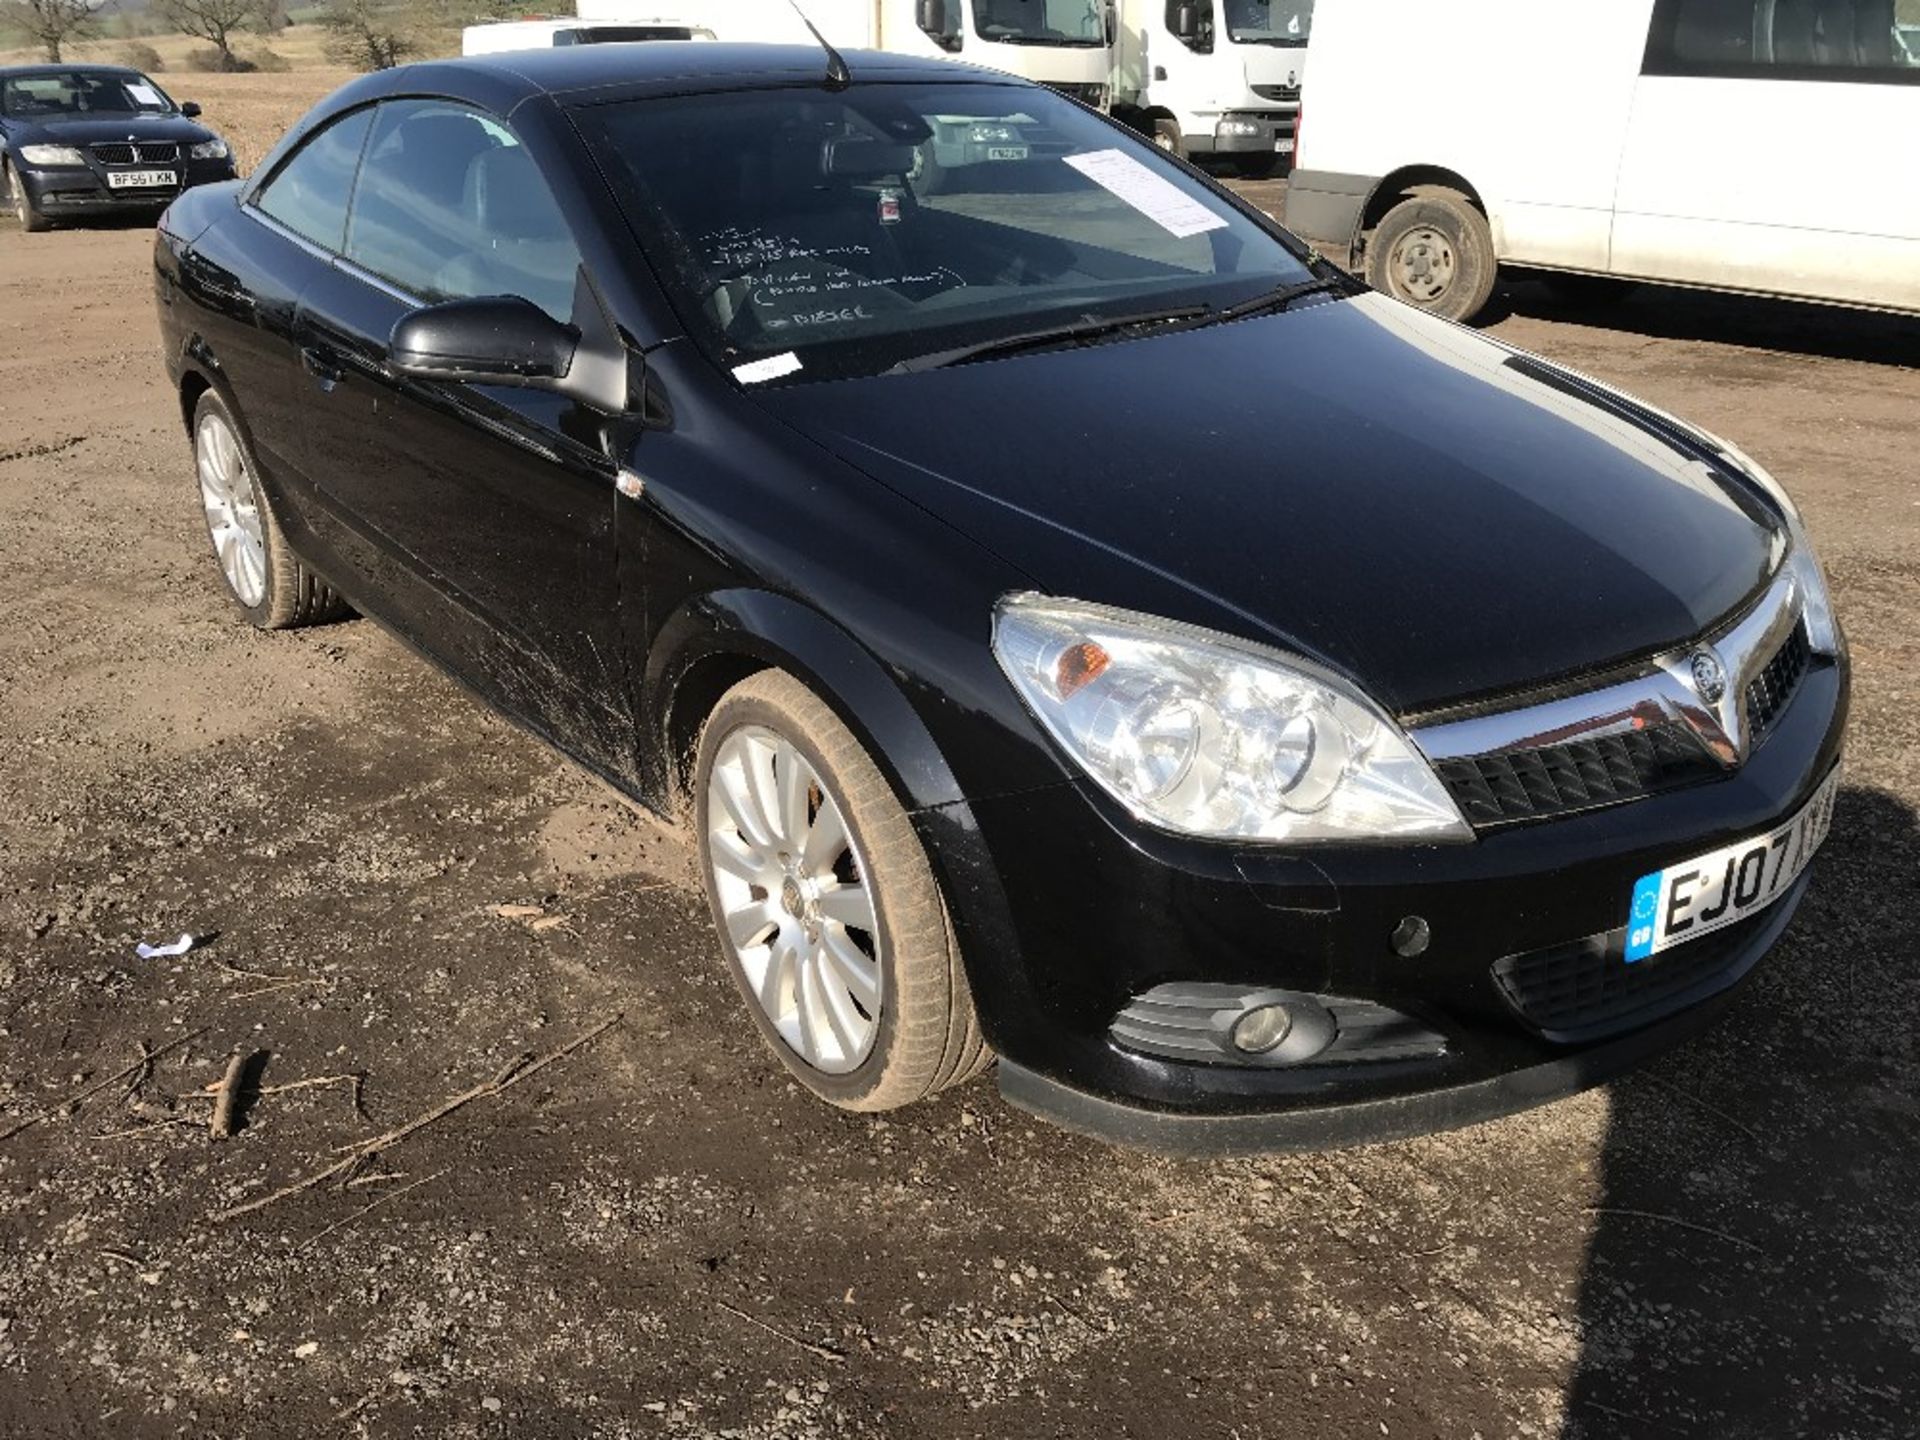 Vauxhall Astra convertable, diesel, black, 135,165 rec.miles, REG. EJ07 XYA, WITH V5 AND TEST TO 8.